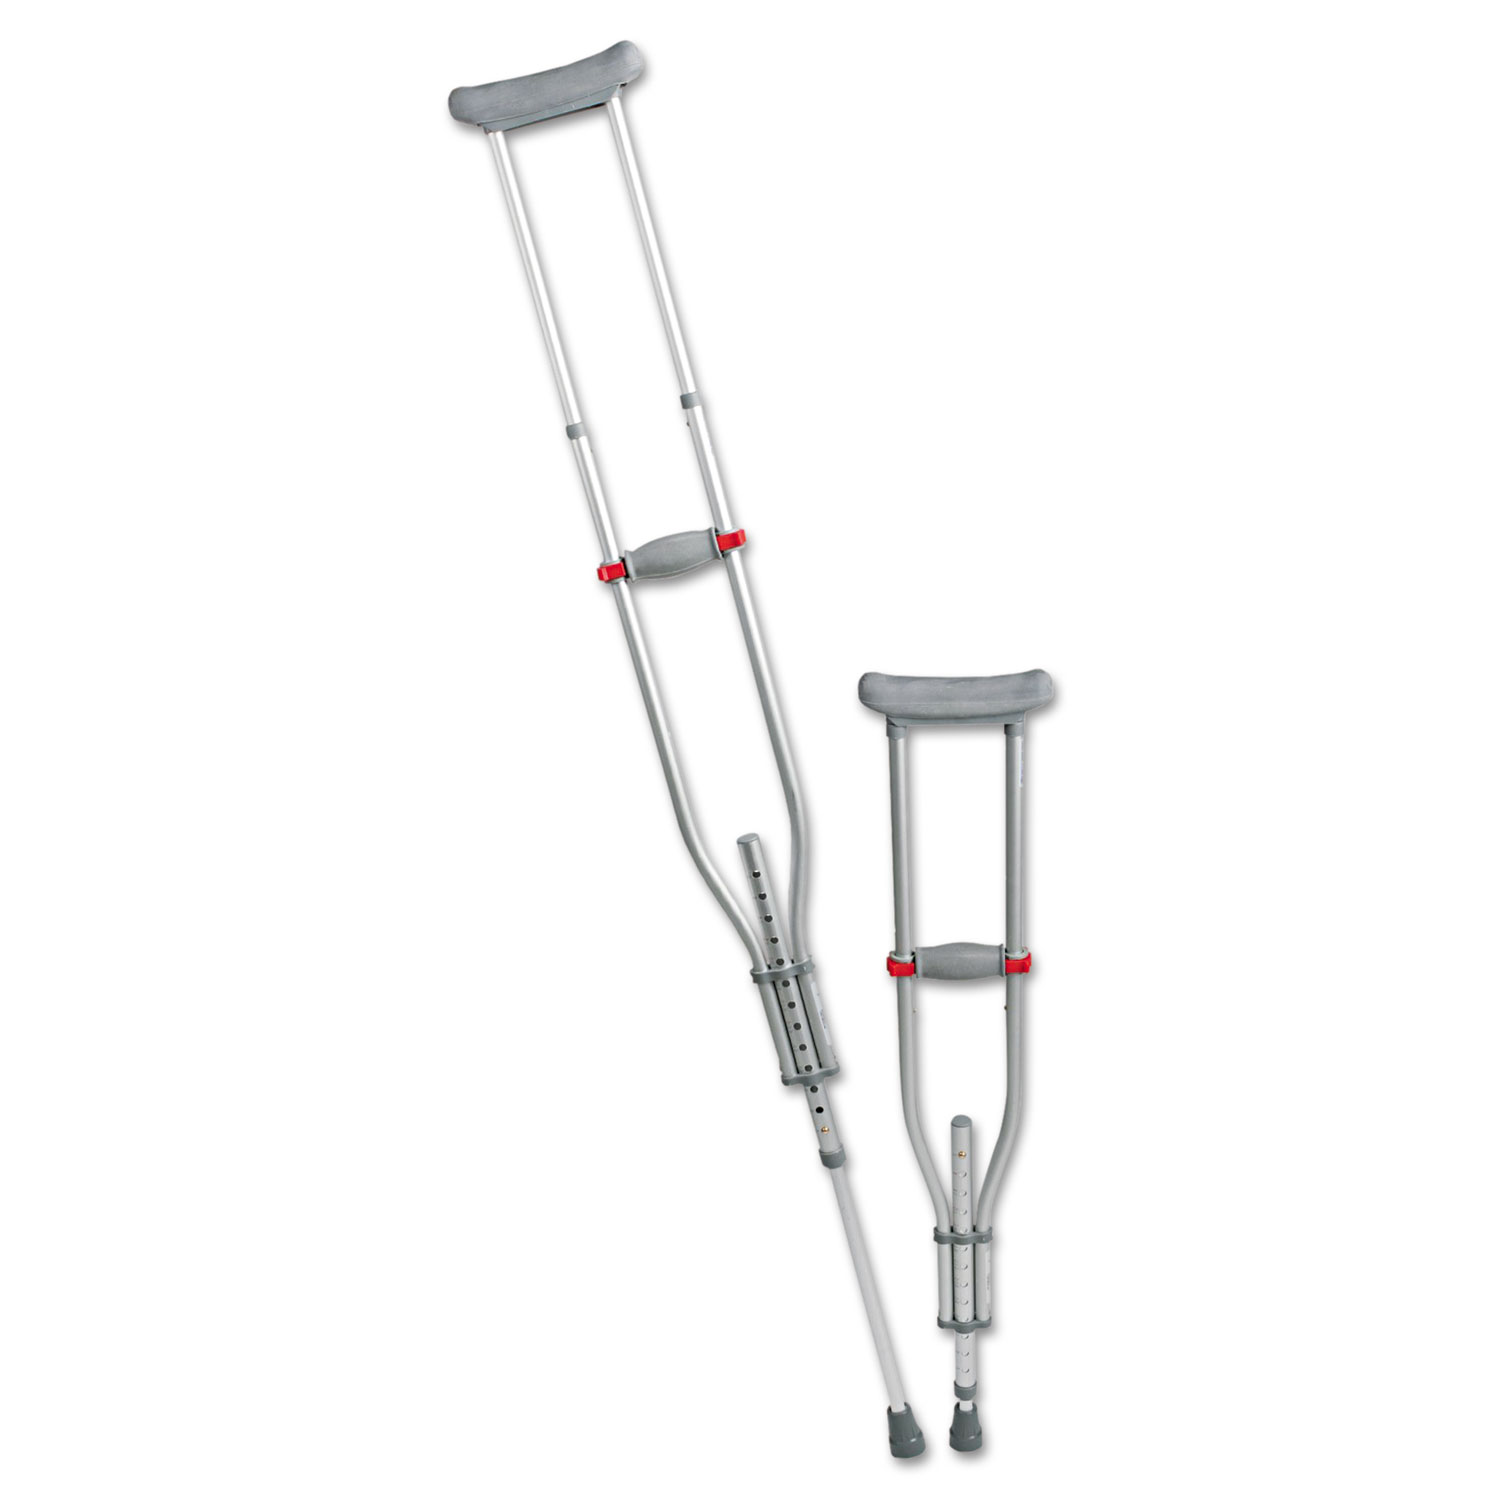  Medline MDS80540 Quick Fit Push Button Aluminum Crutches, Adjustable, 4' 7 to 6' 7 (MIIMDS80540) 